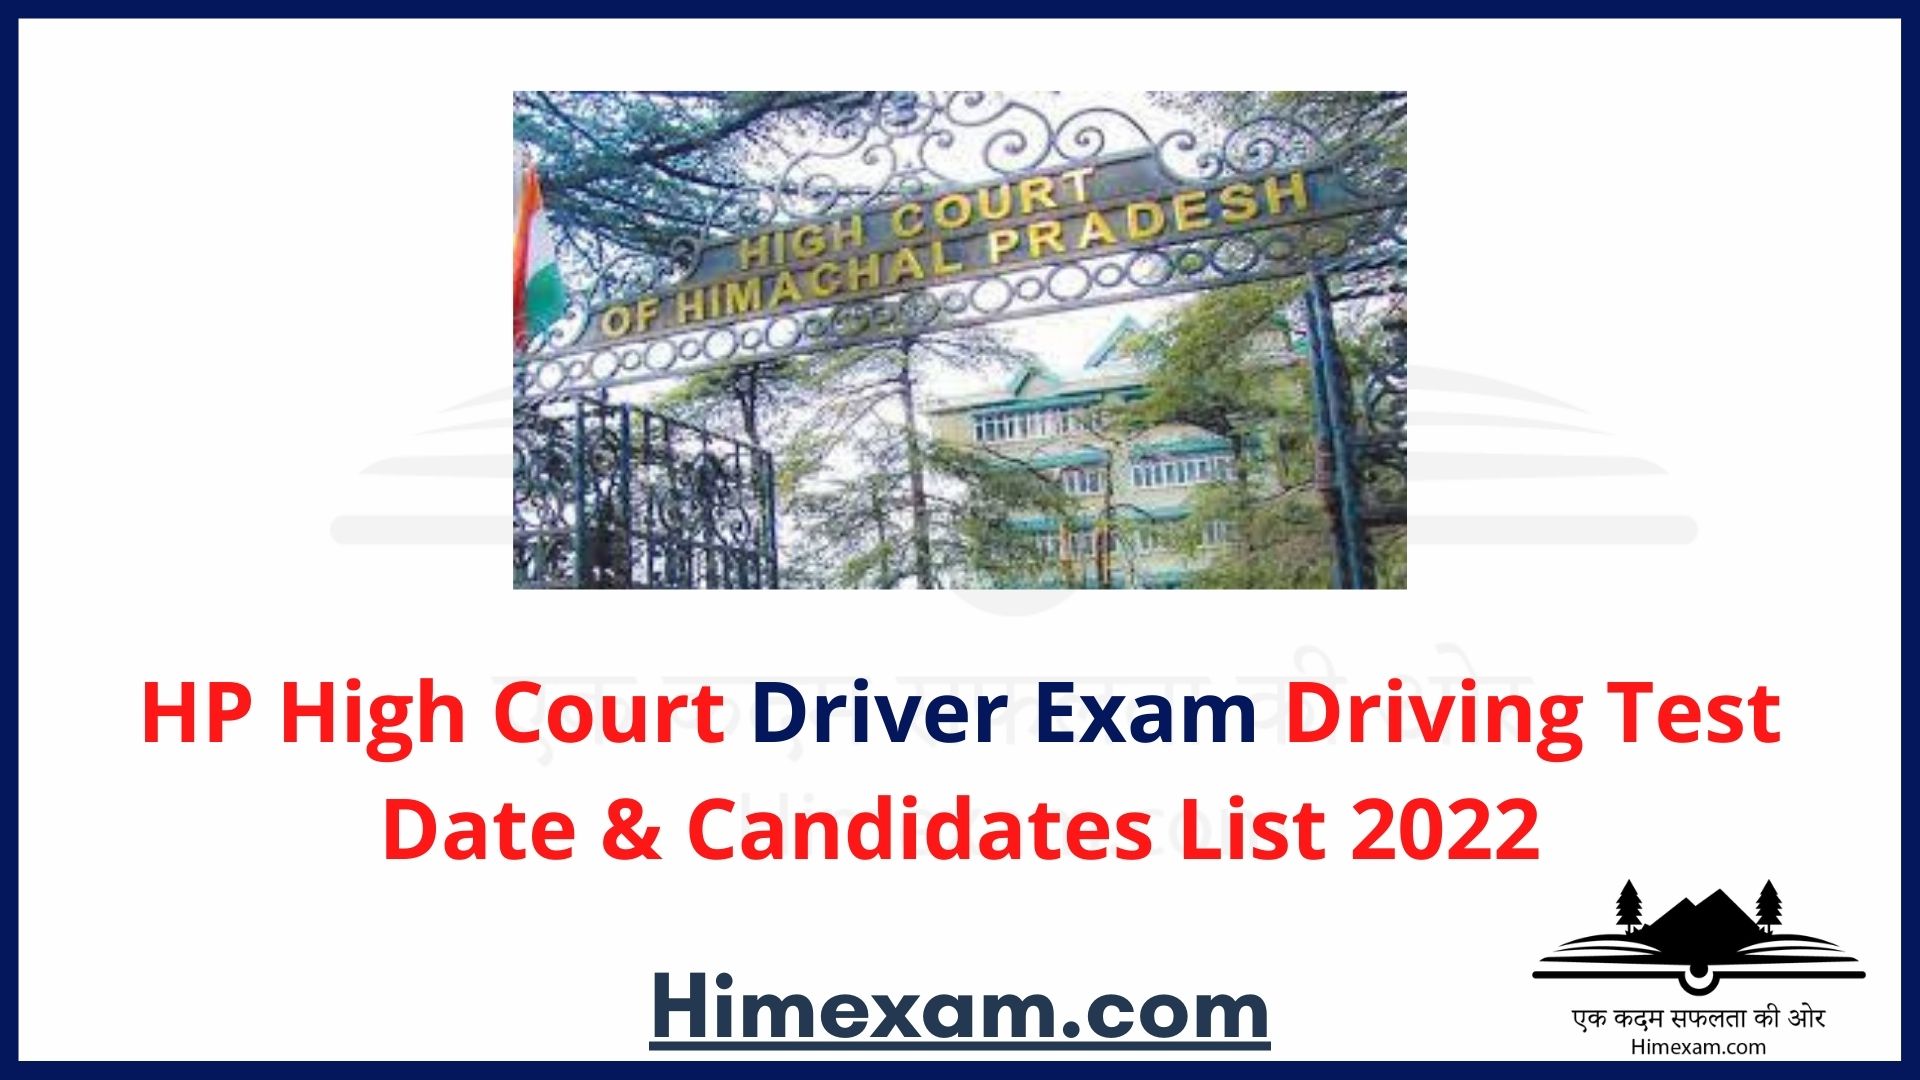 HP High Court Driving Test Date & Candidates List 2022